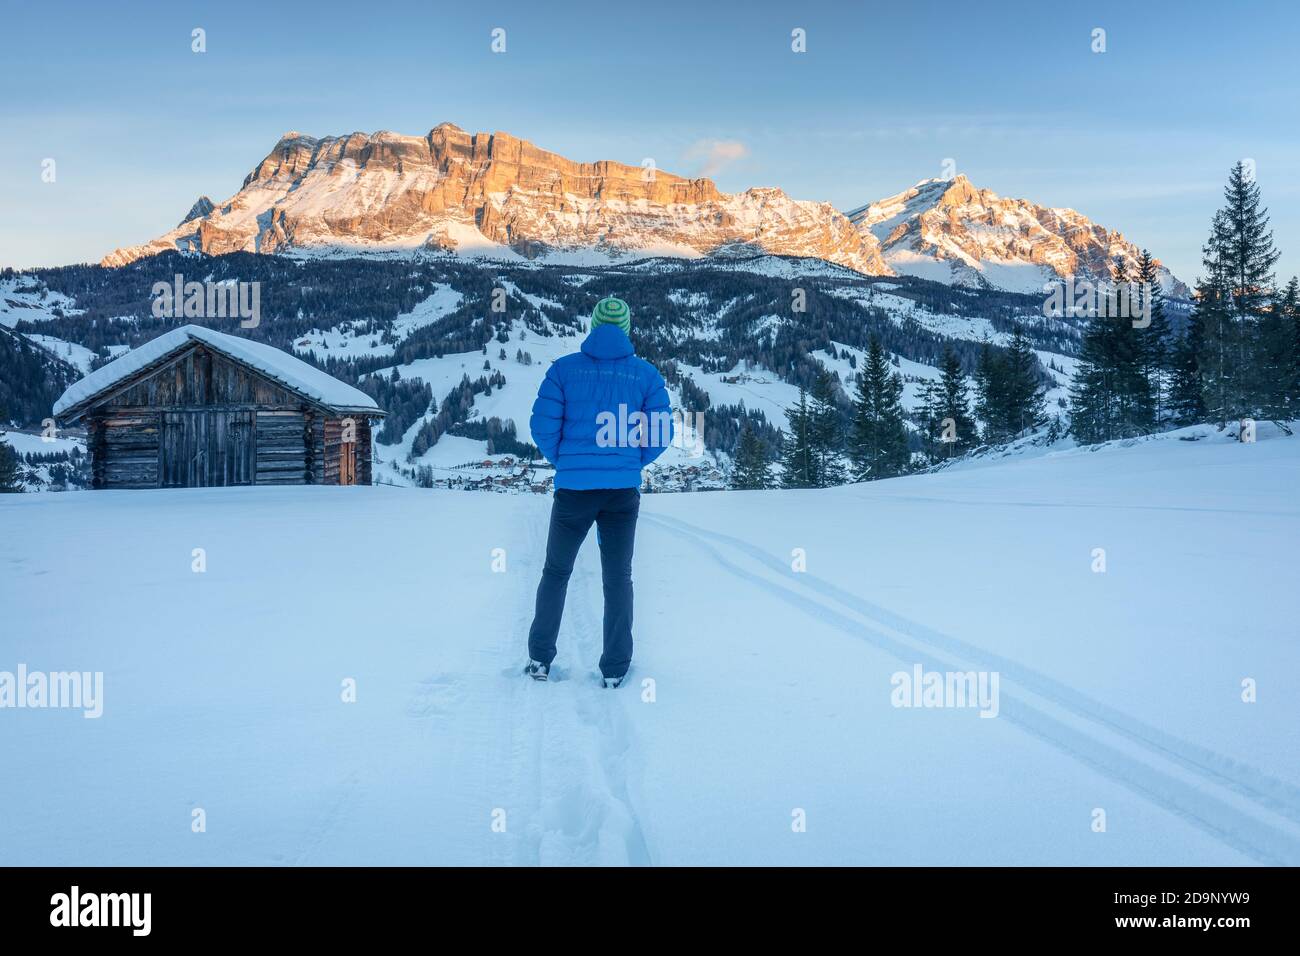 lonely man (45 years old) traditional wooden huts, winter landscape with the Monte Cavallo / L'Ciaval / Heiligkreuzkofel in the background, Dolomites, Abtei, Badia, Ladin valley, Gadertal, Bolzano, South Tyrol, Italy, Europe Stock Photo